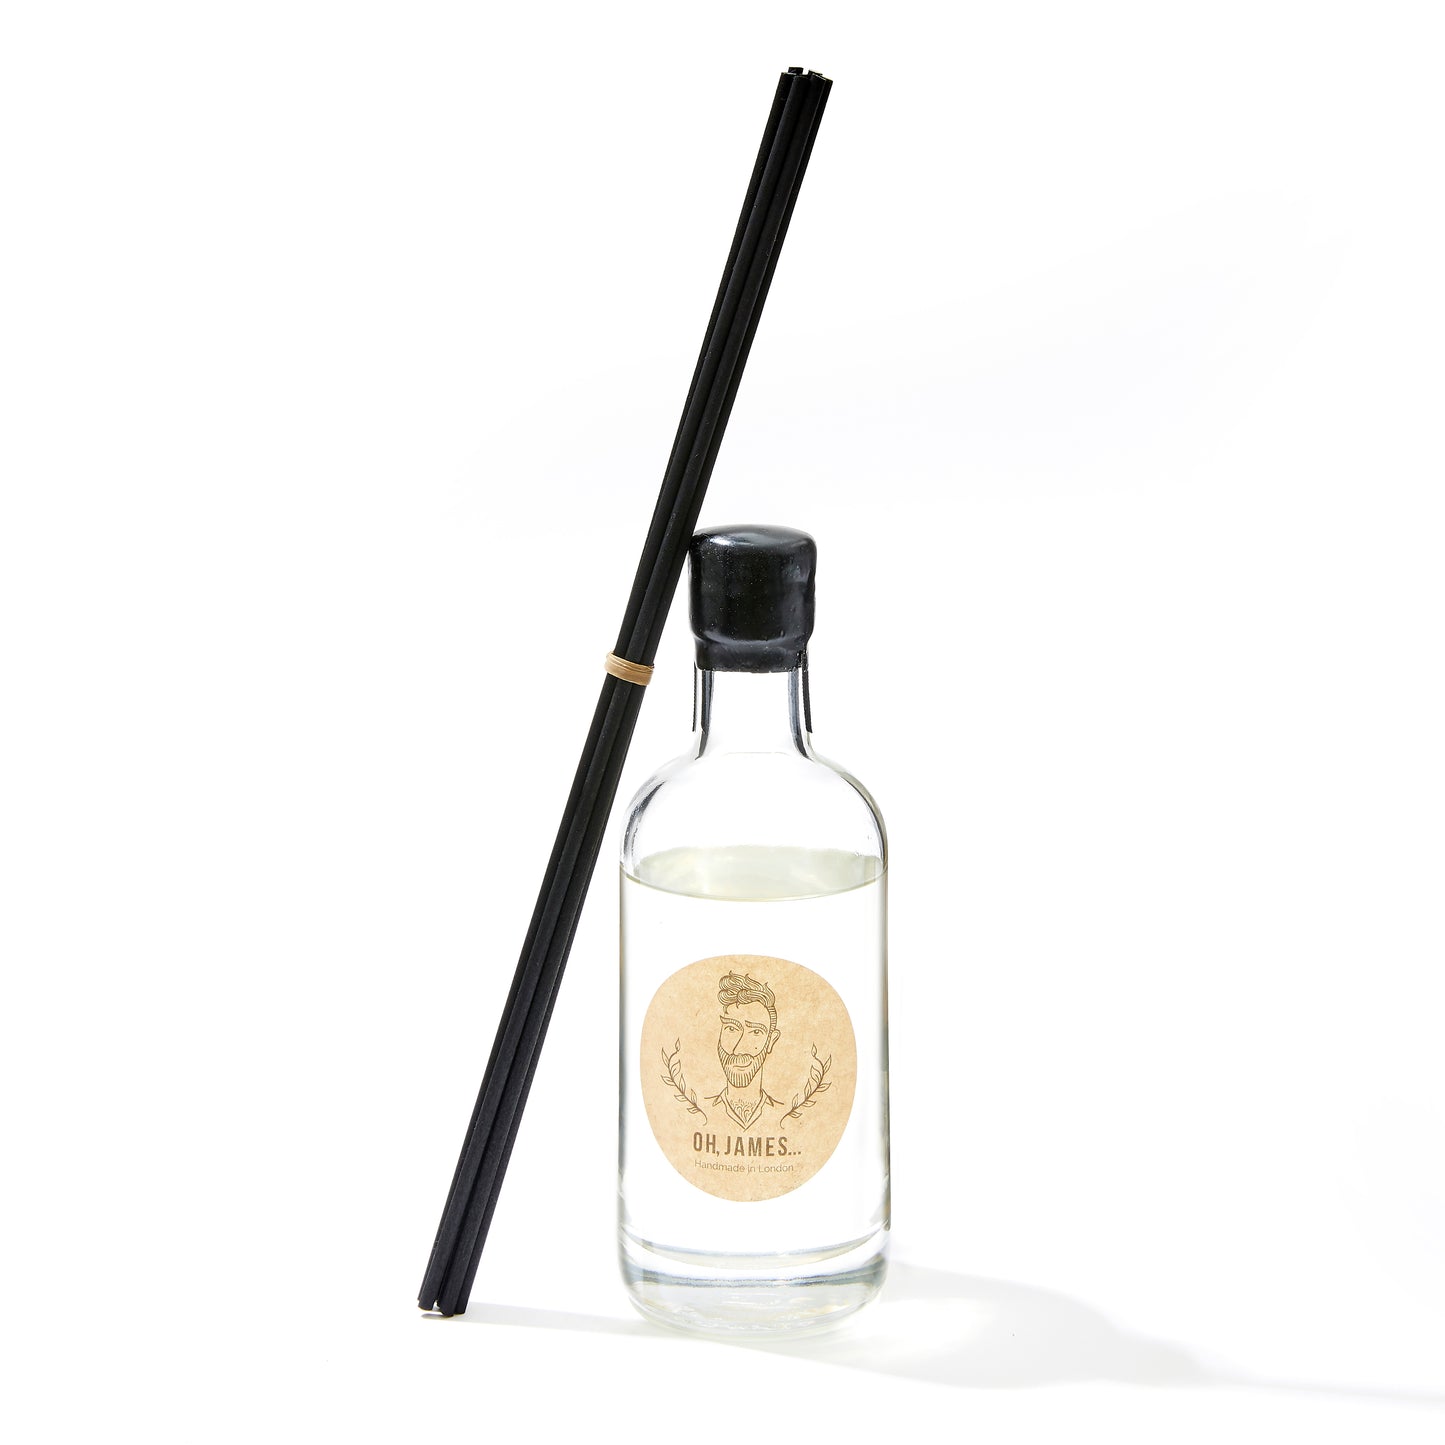 Oh, James... Reed Diffusers